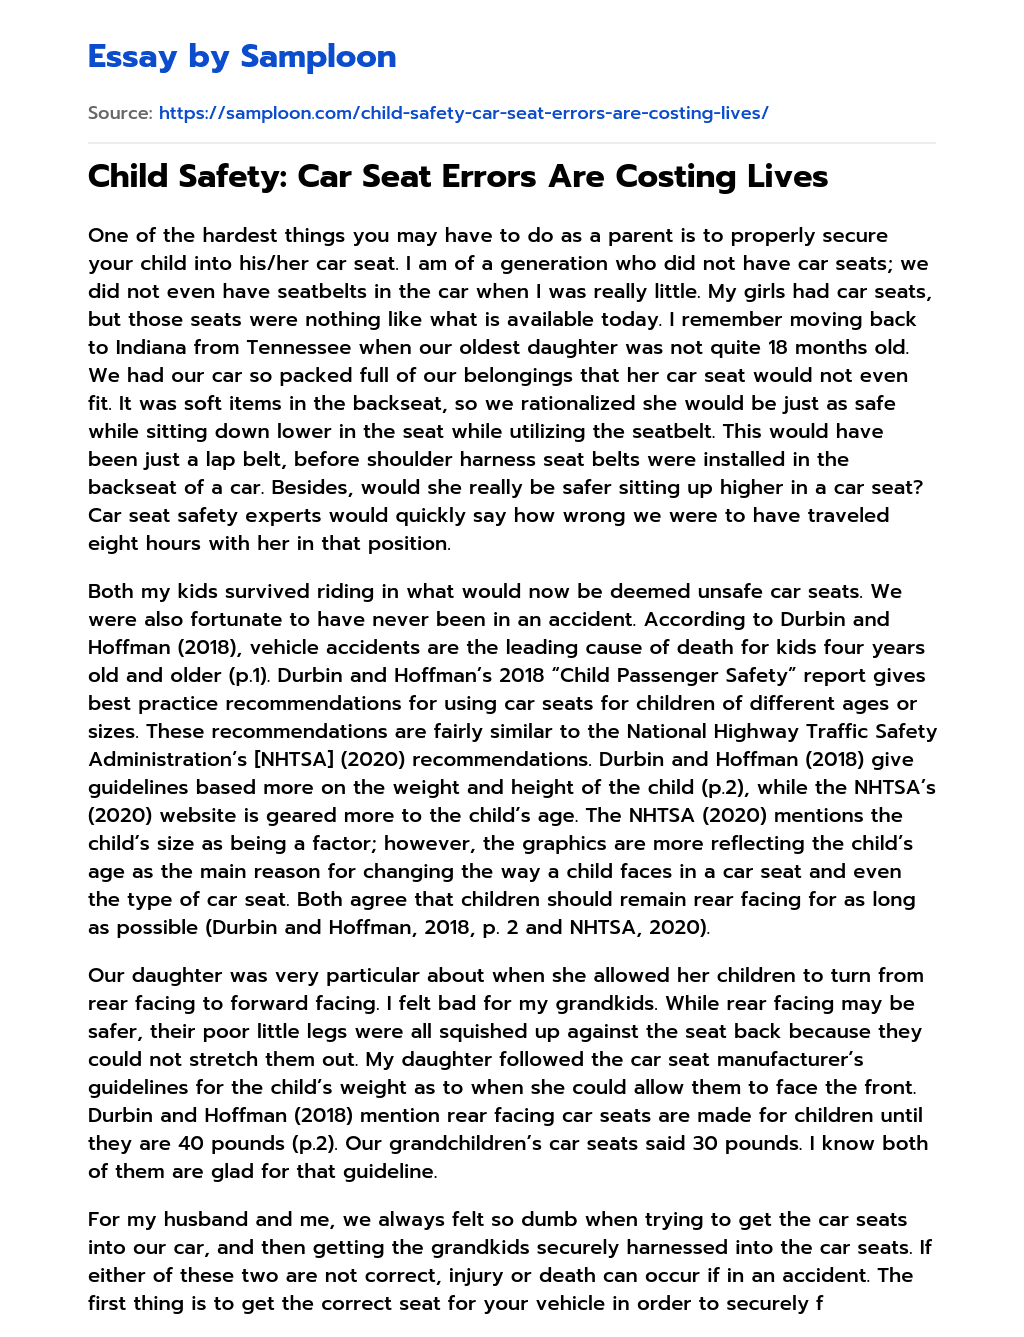 essay about child car seat